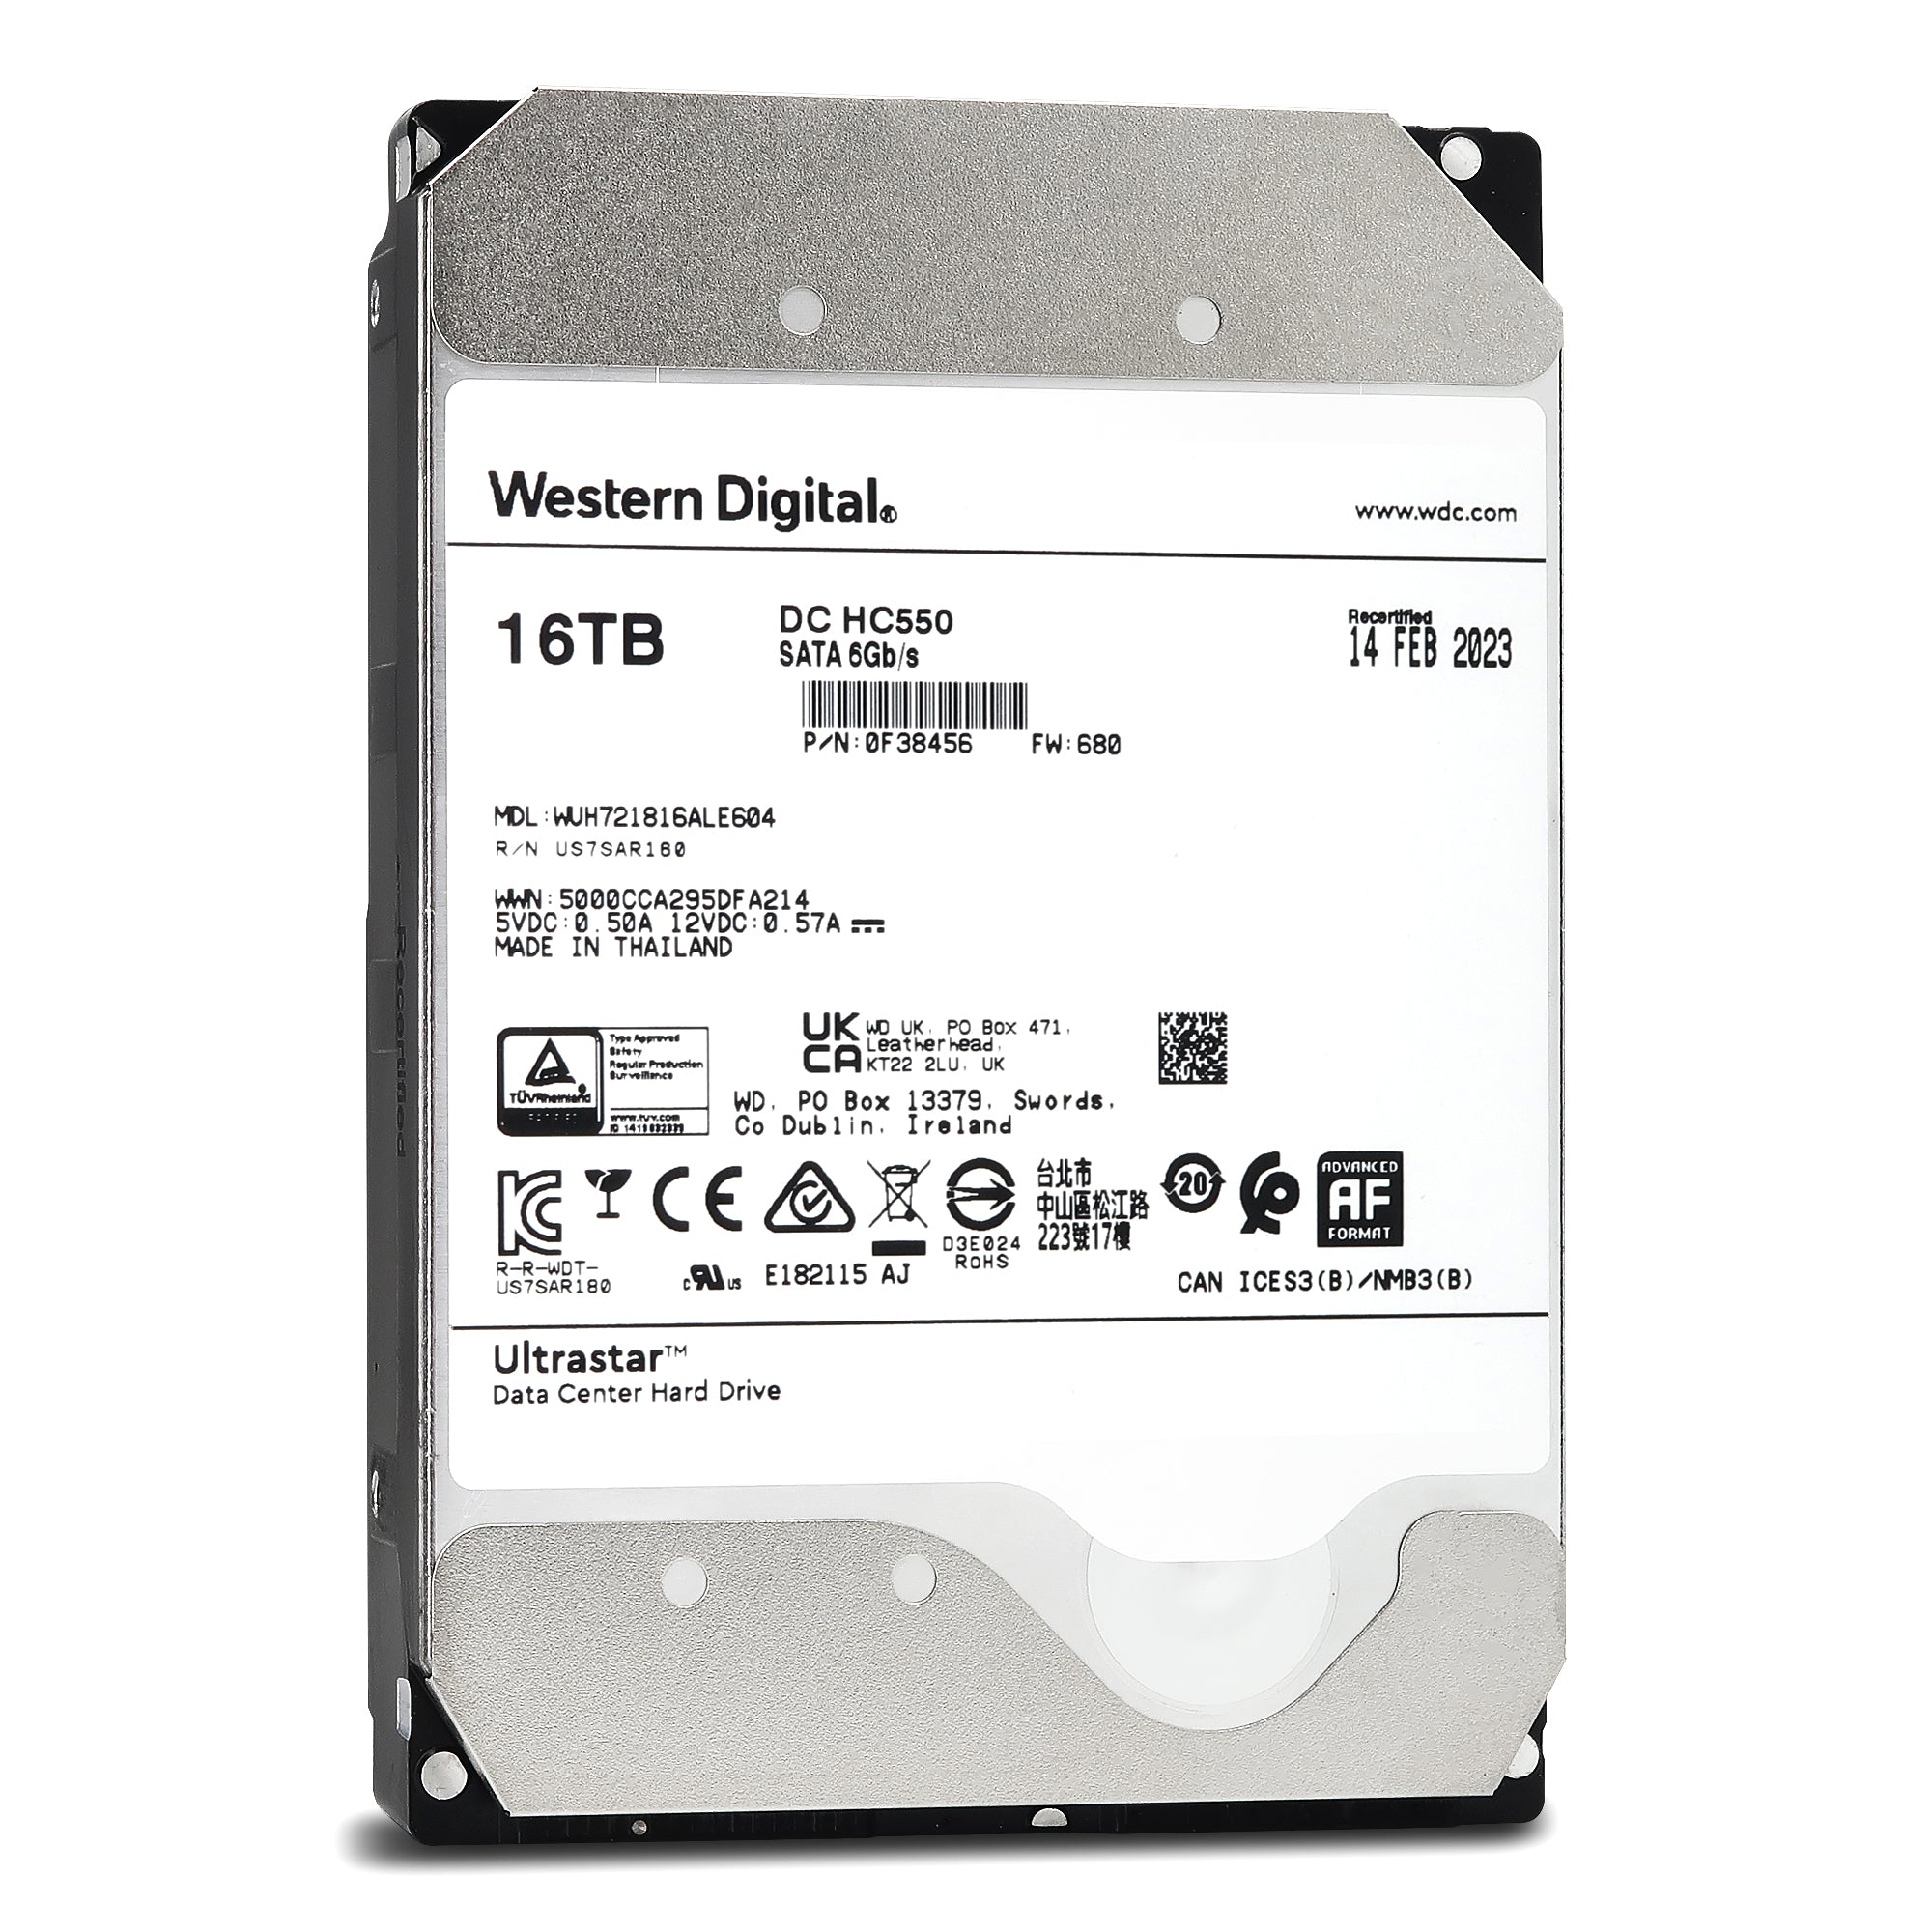 Western Digital Ultrastar DC HC550 WUH721816ALE604 0F38456 16TB 7.2K RPM SATA 6Gb/s 512e Power Disable 3.5in Recertified Hard Drive Front View